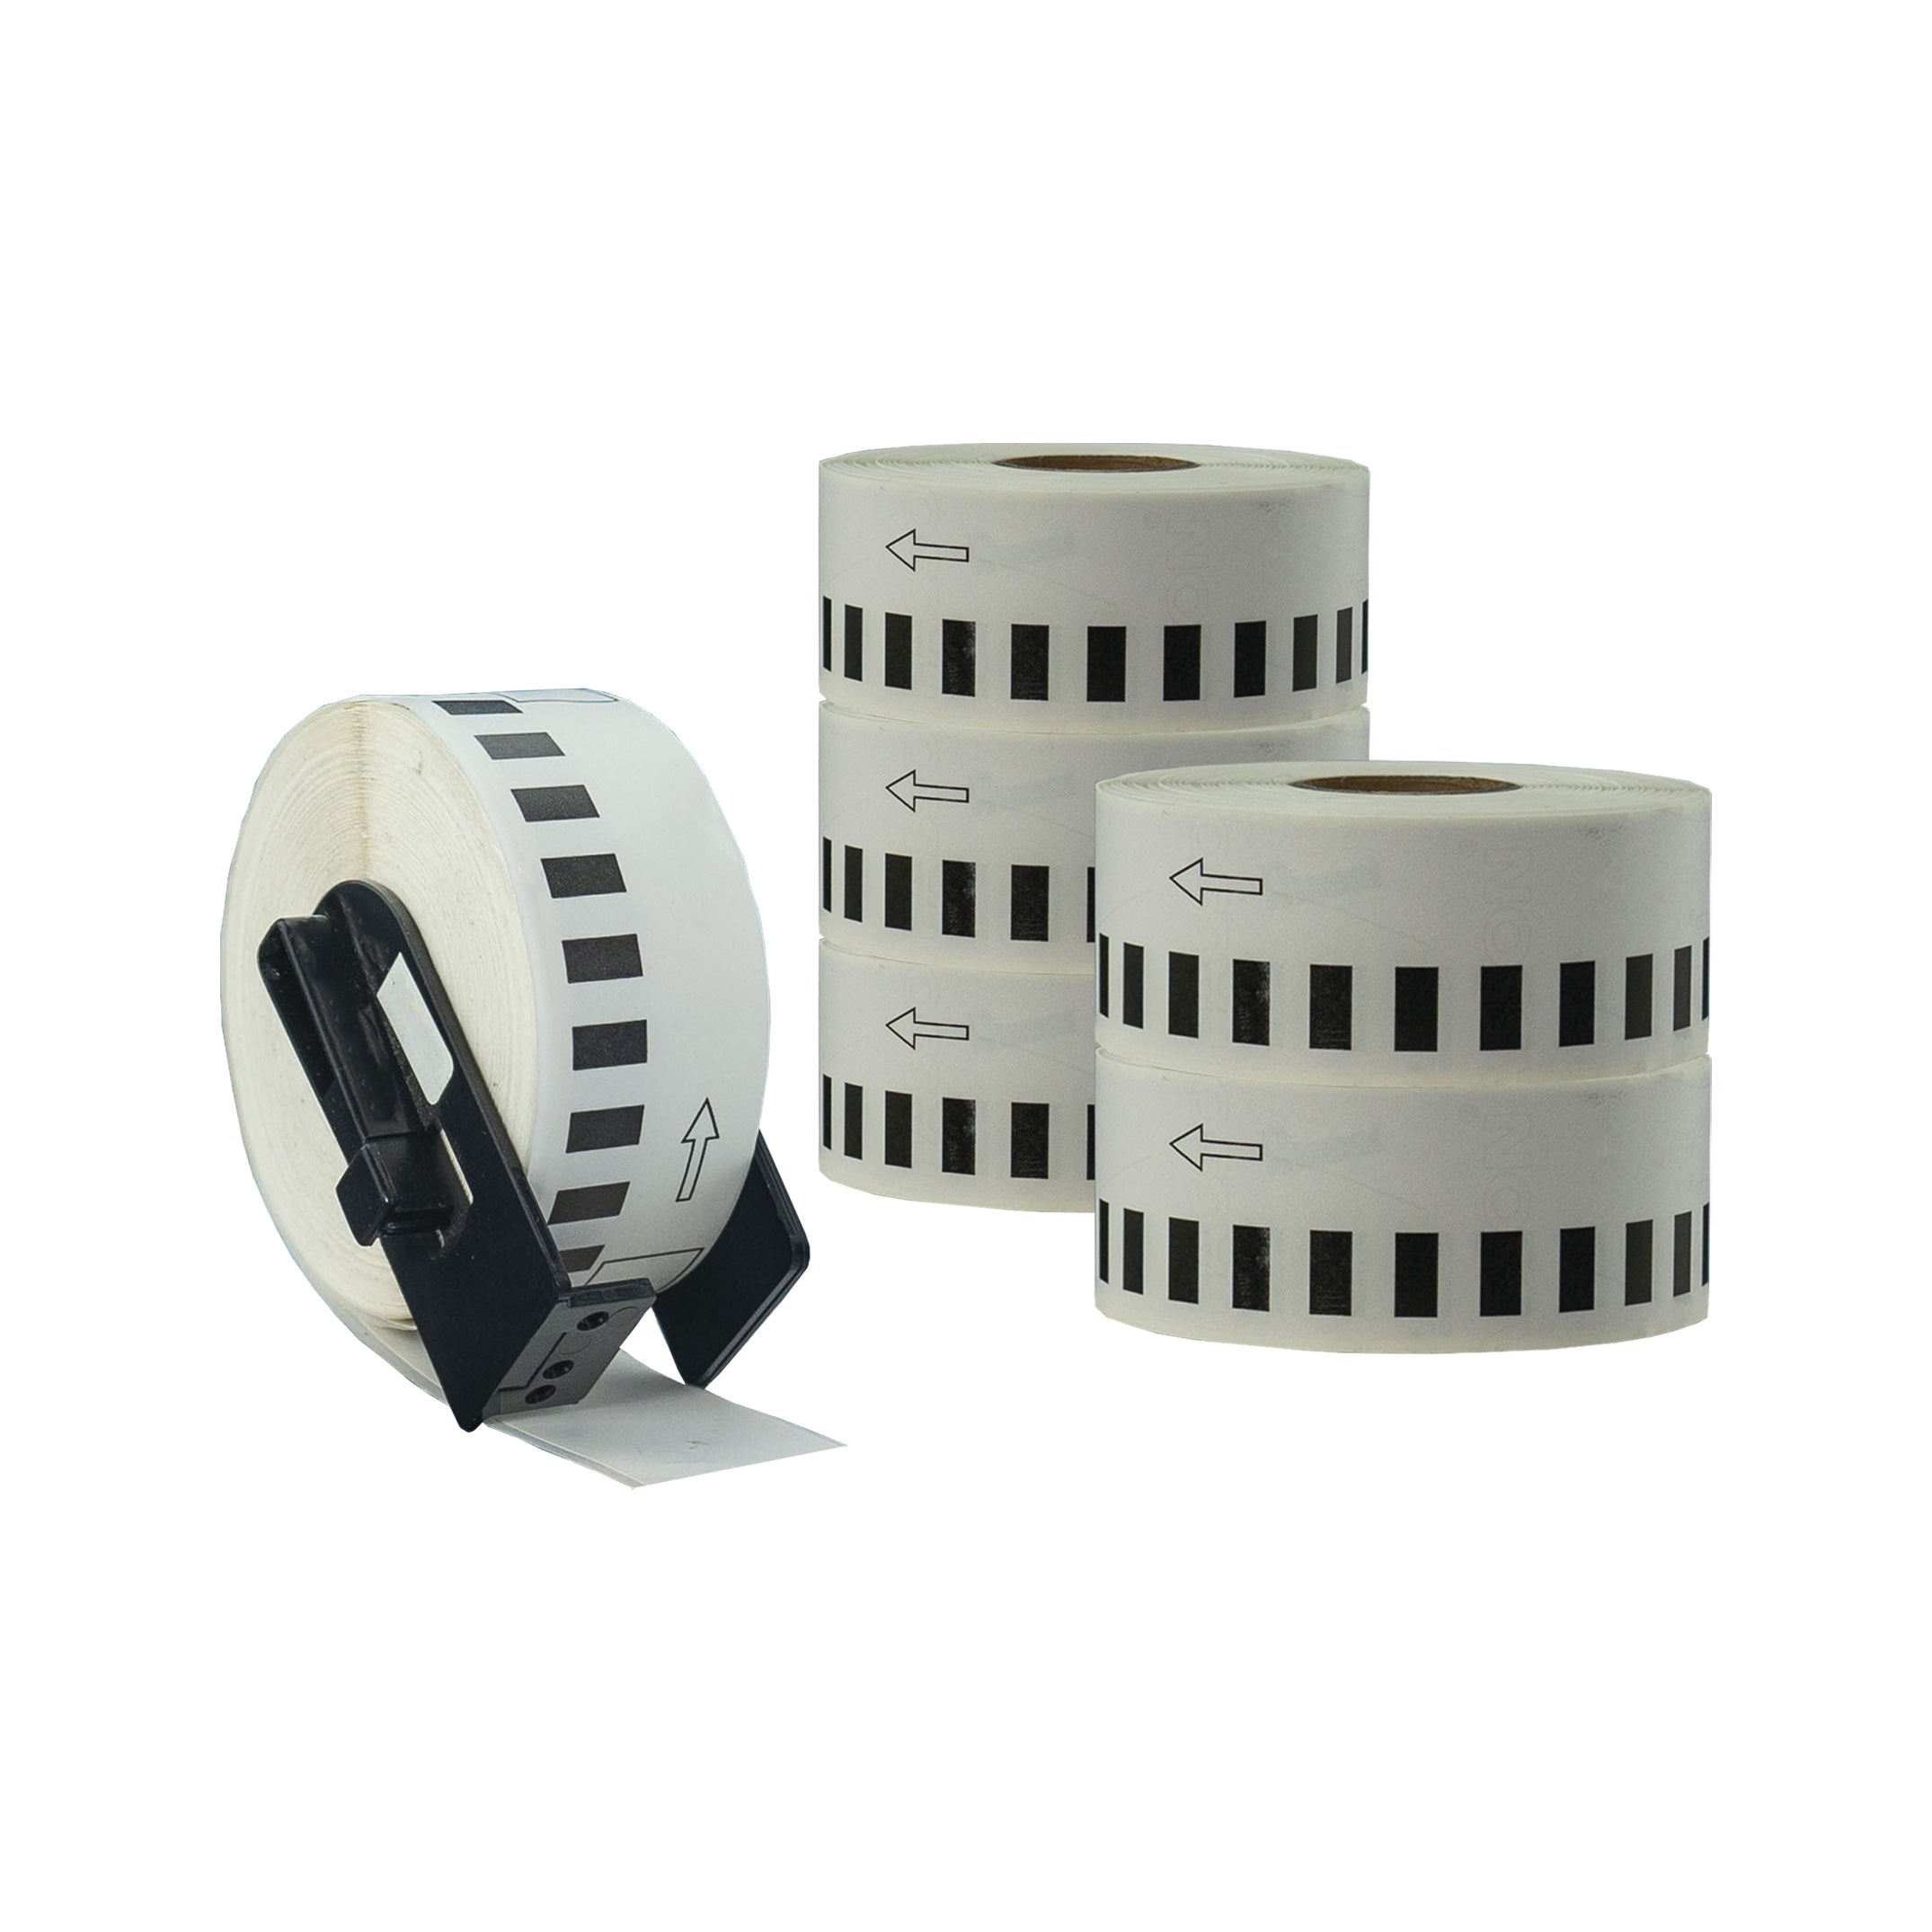 Compatible Brother DK-22210 White Label Tapes 29mm x 30.48m Continuous Length 5+1